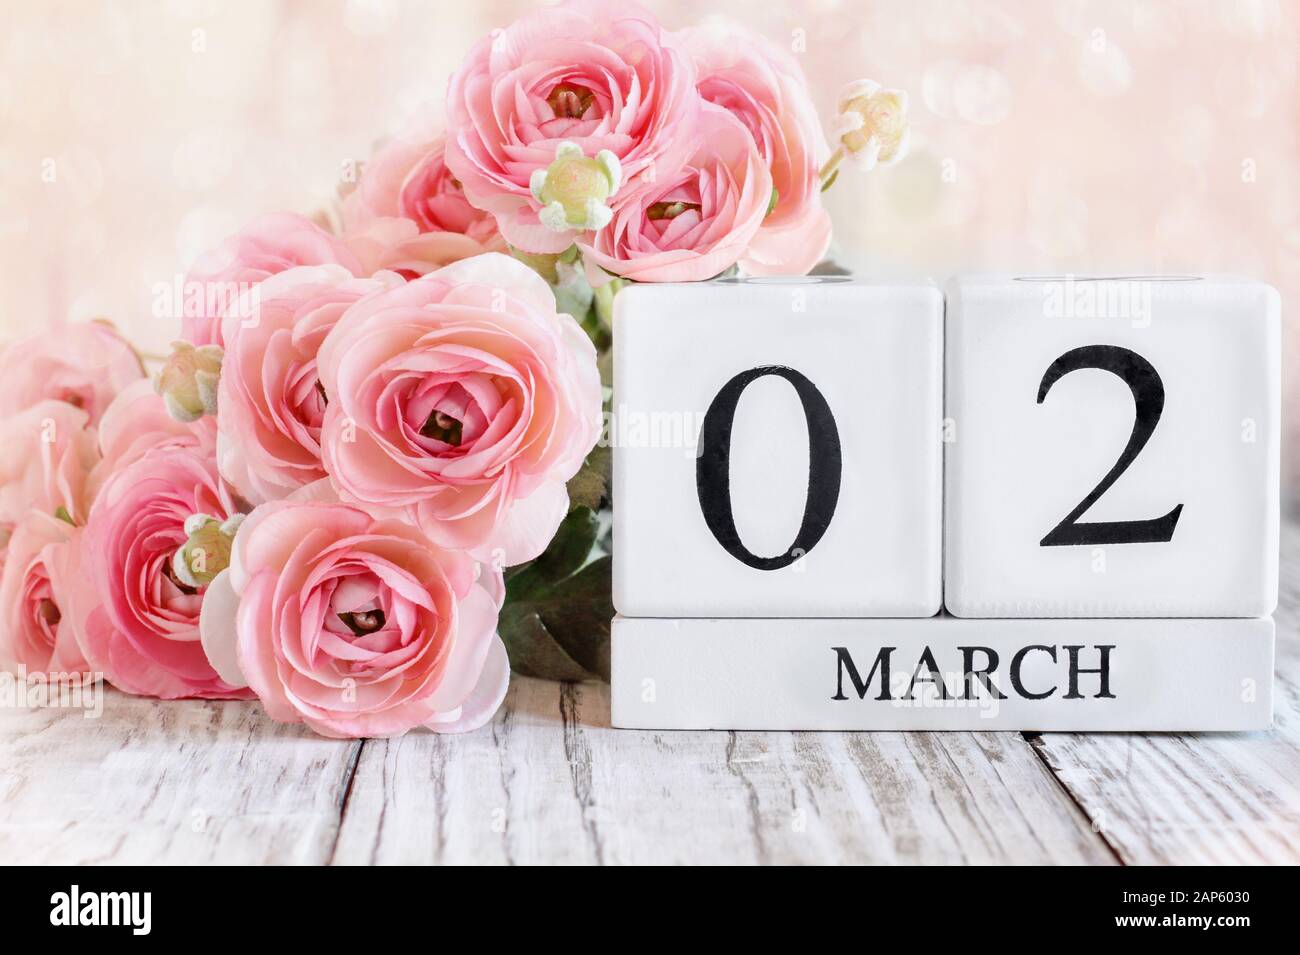 White wood calendar blocks with the date March 02 and pink ranunculus flowers over a wooden table. Selective focus with blurred background. Stock Photo